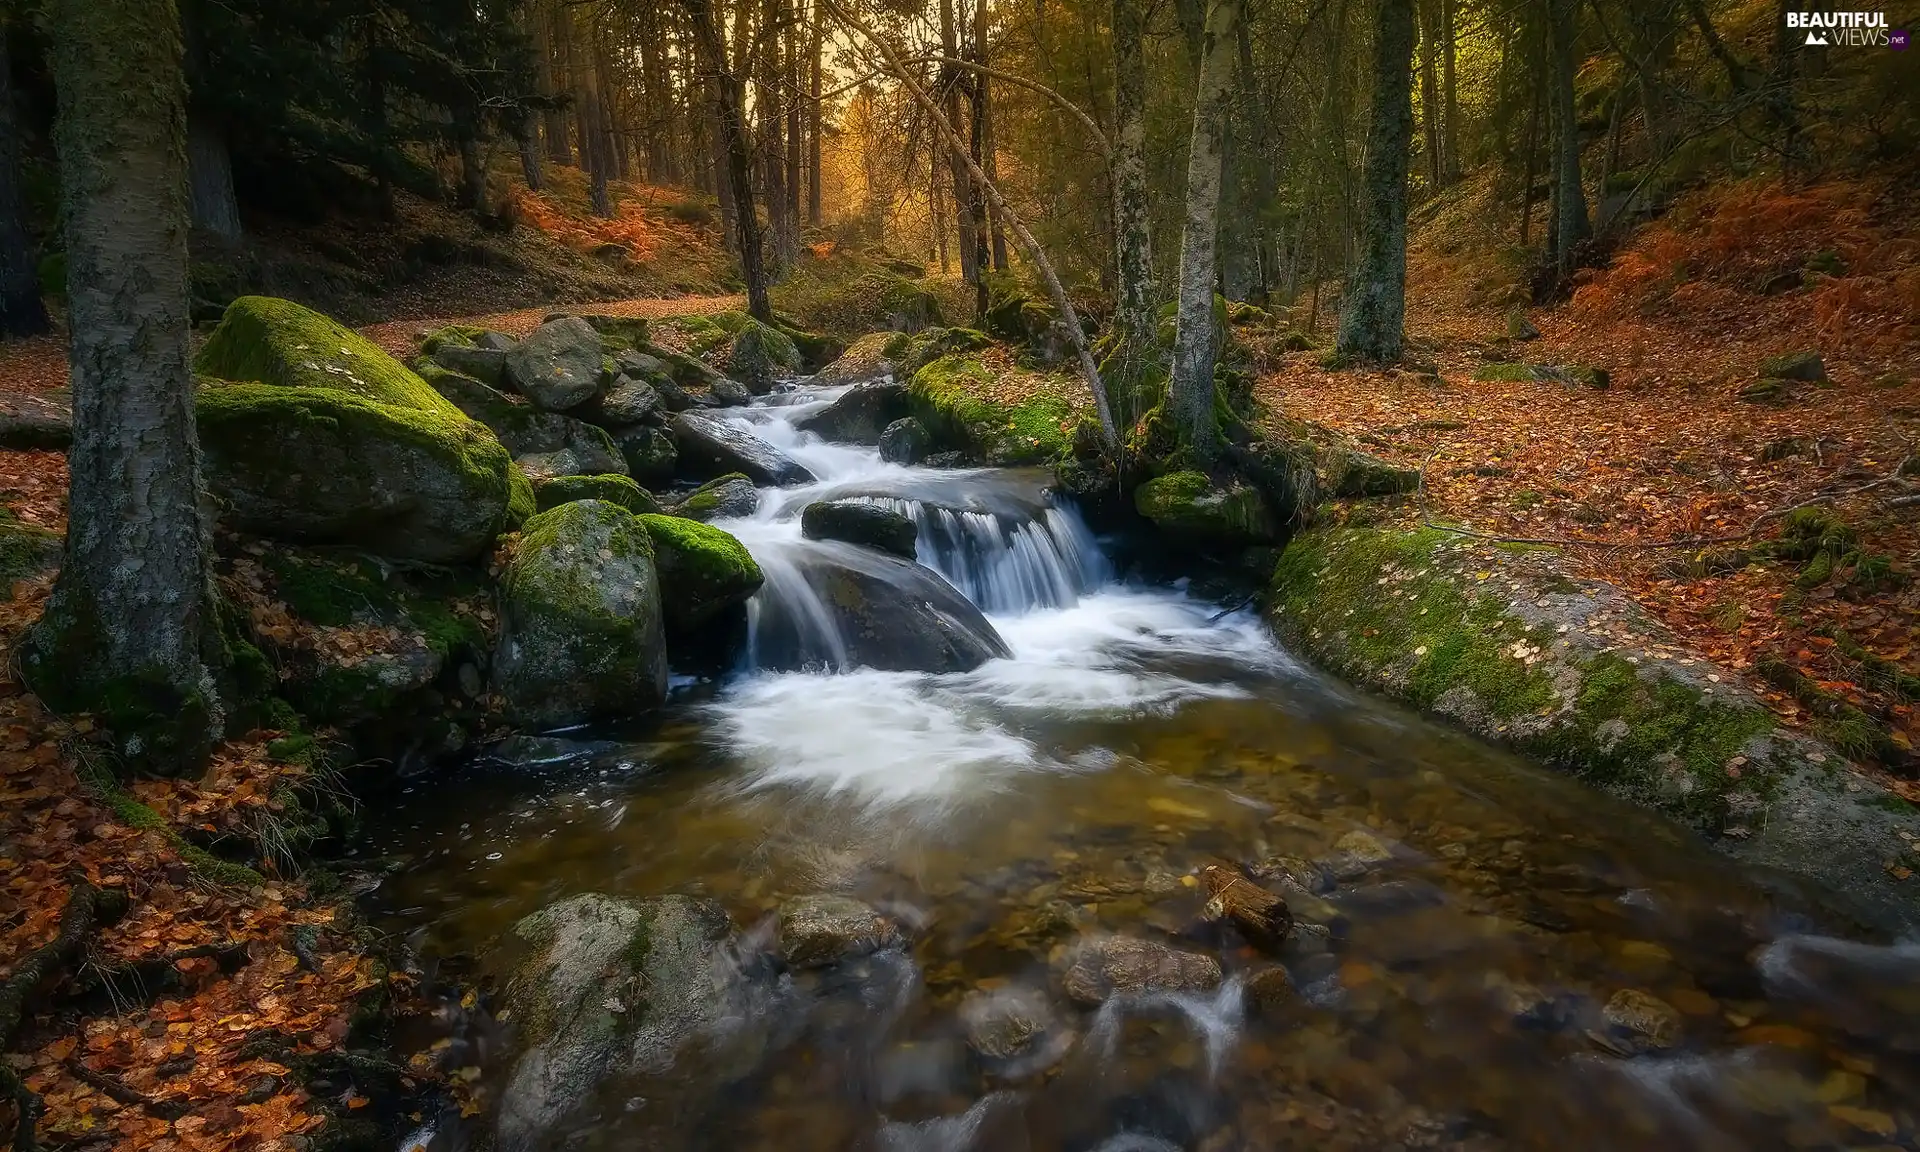 trees, viewes, boulders, River, Stones, forest, autumn, mossy